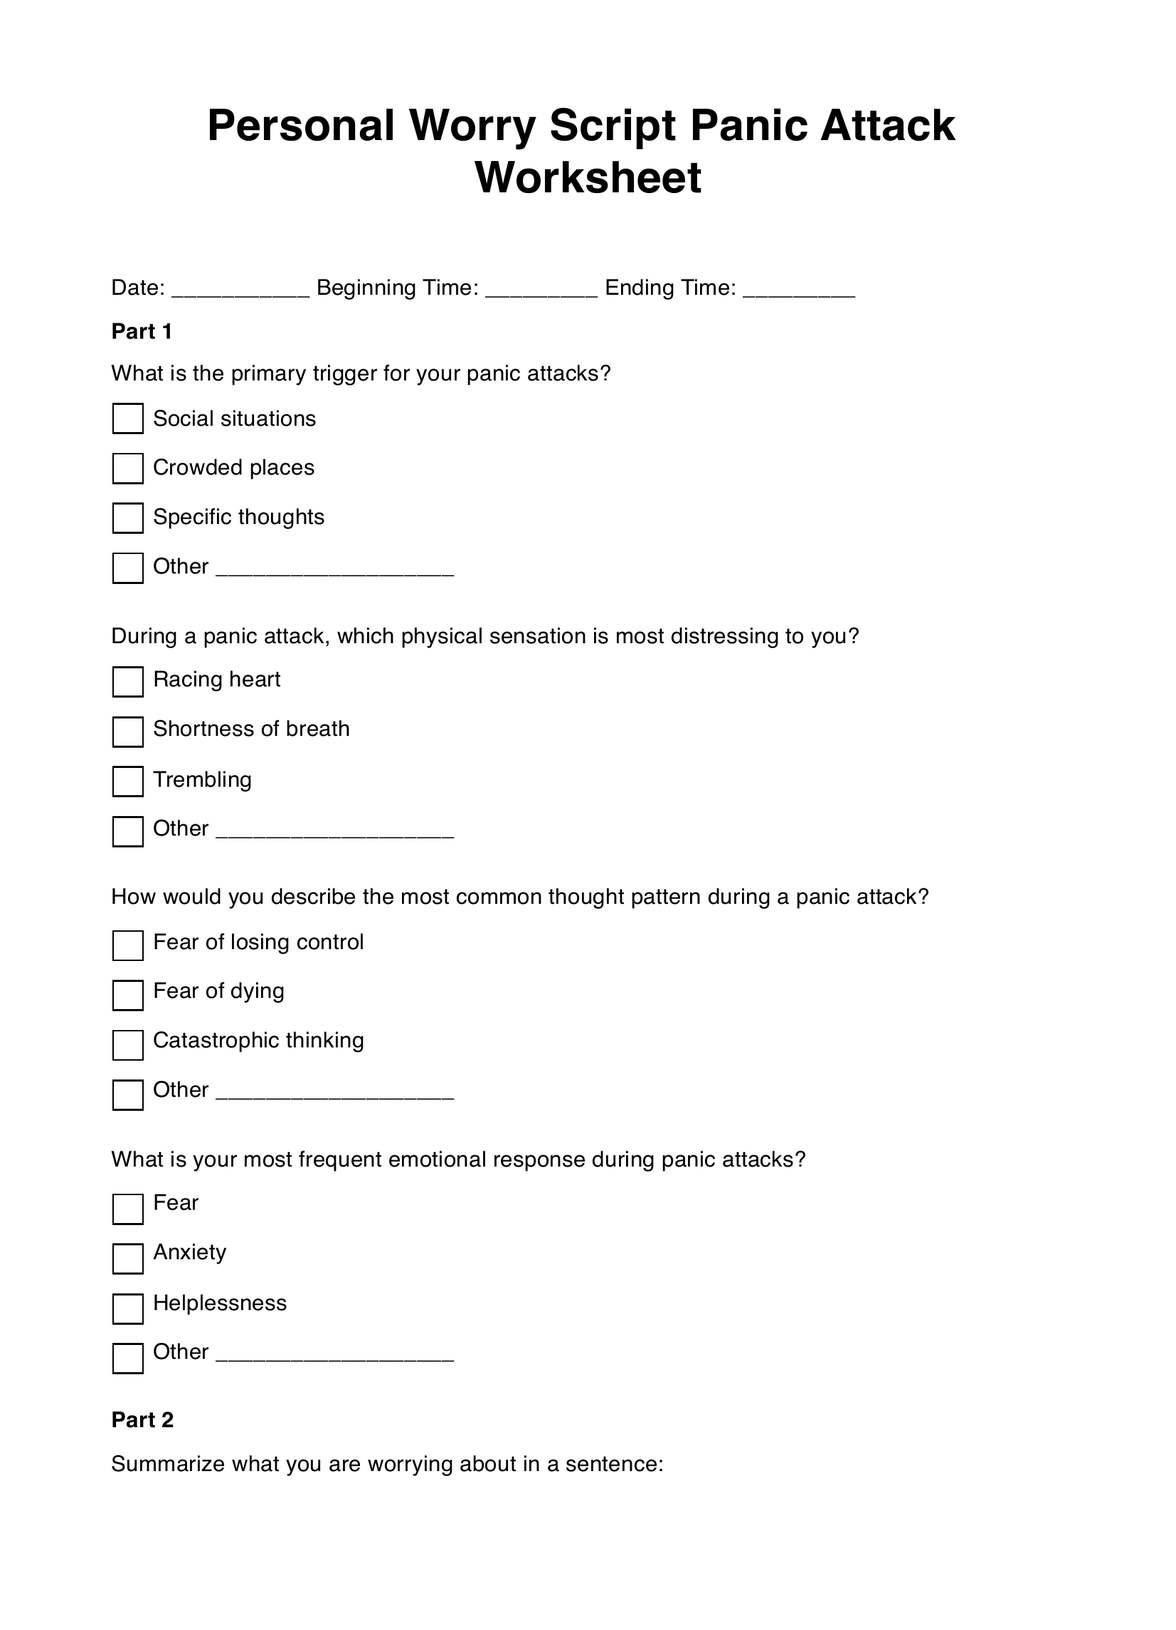 Personal Worry Script Panic Attack Worksheet PDF Example